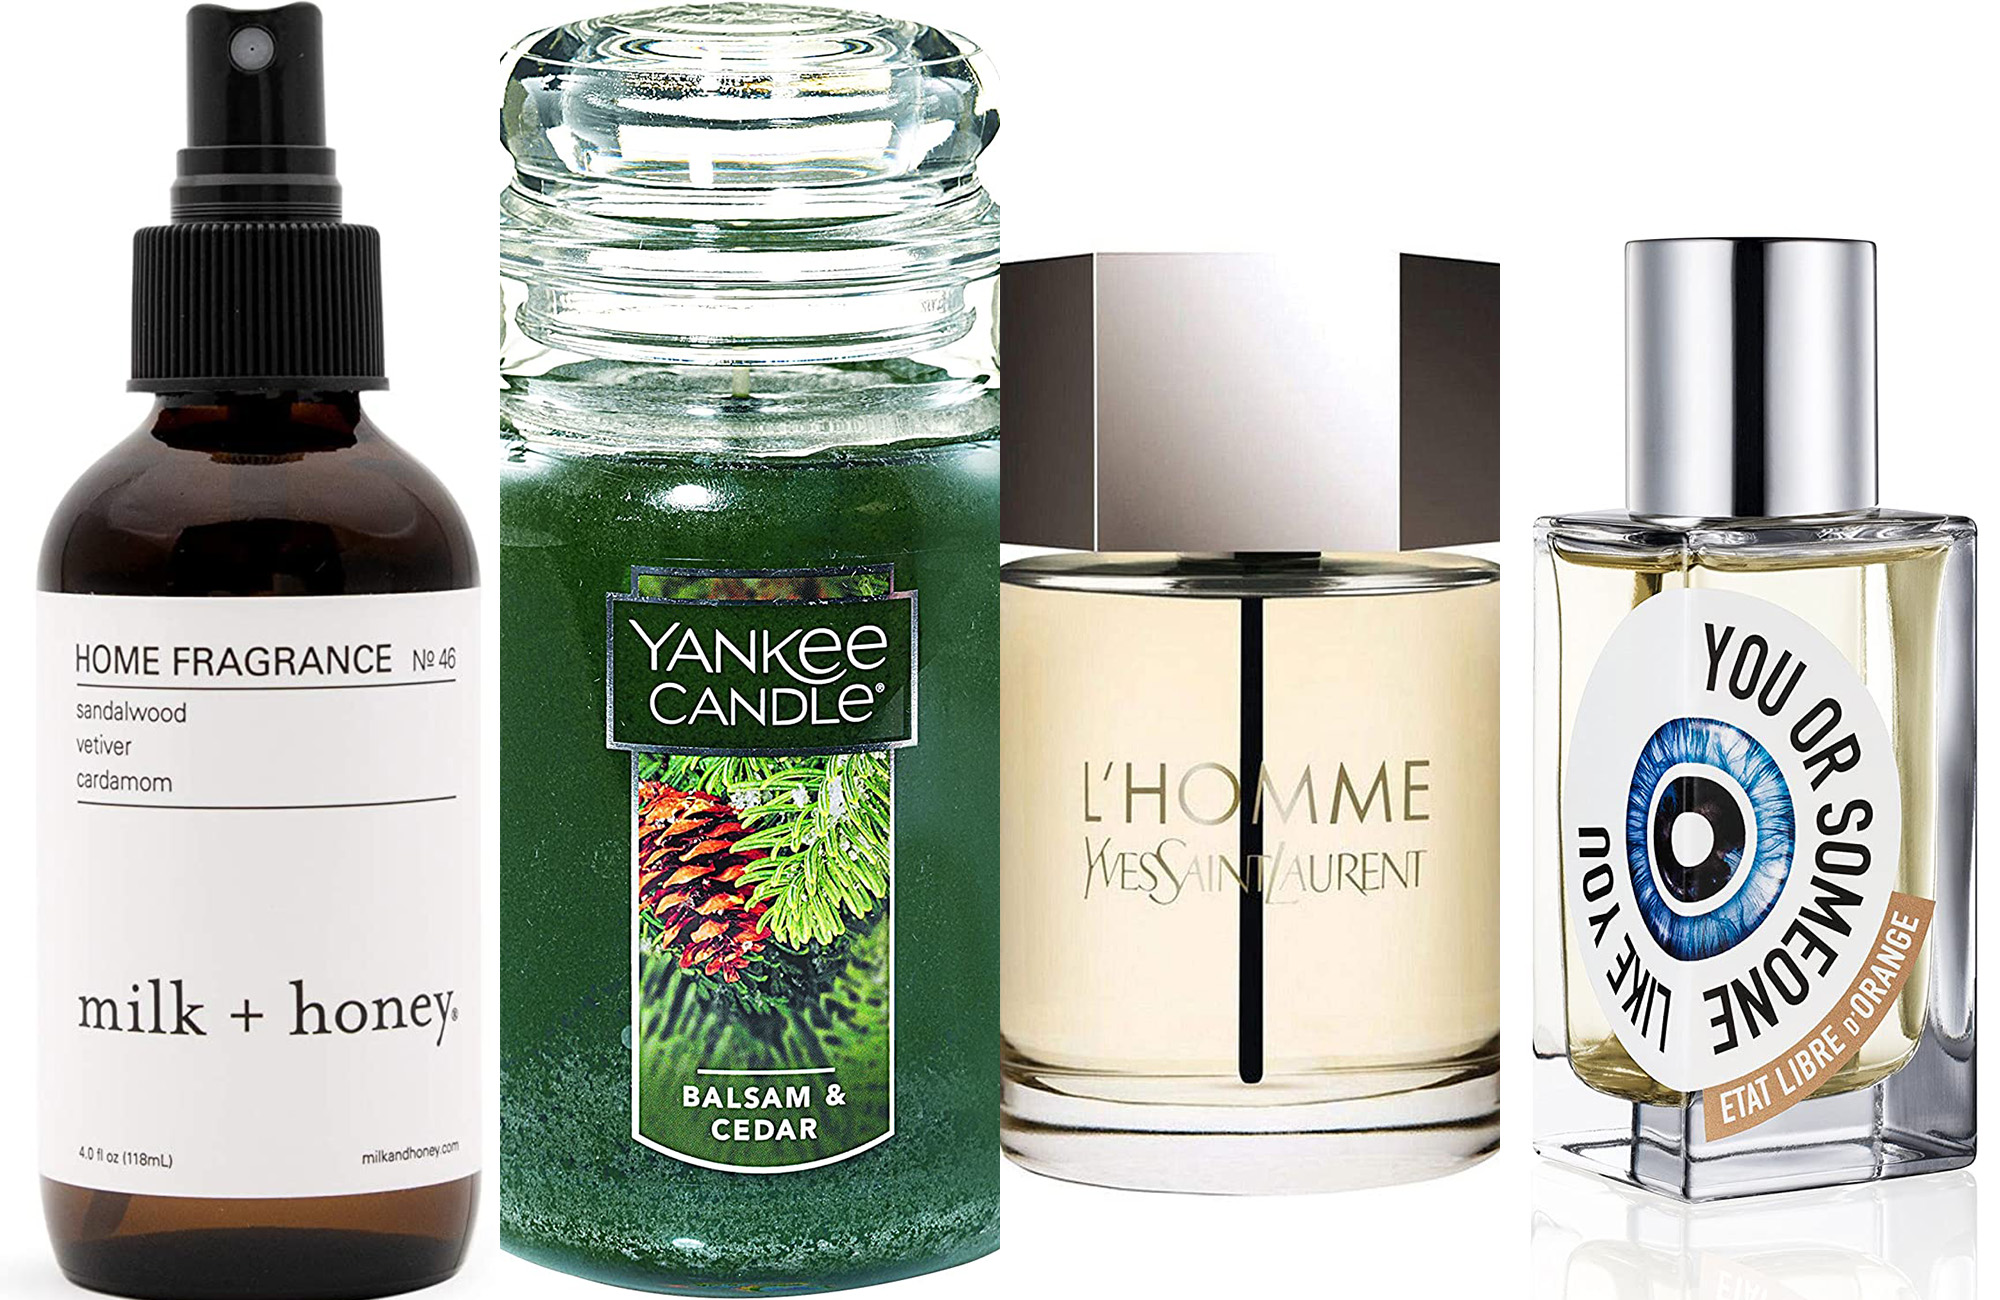 California Scents Fragrance Guide: What do they REALLY smell like